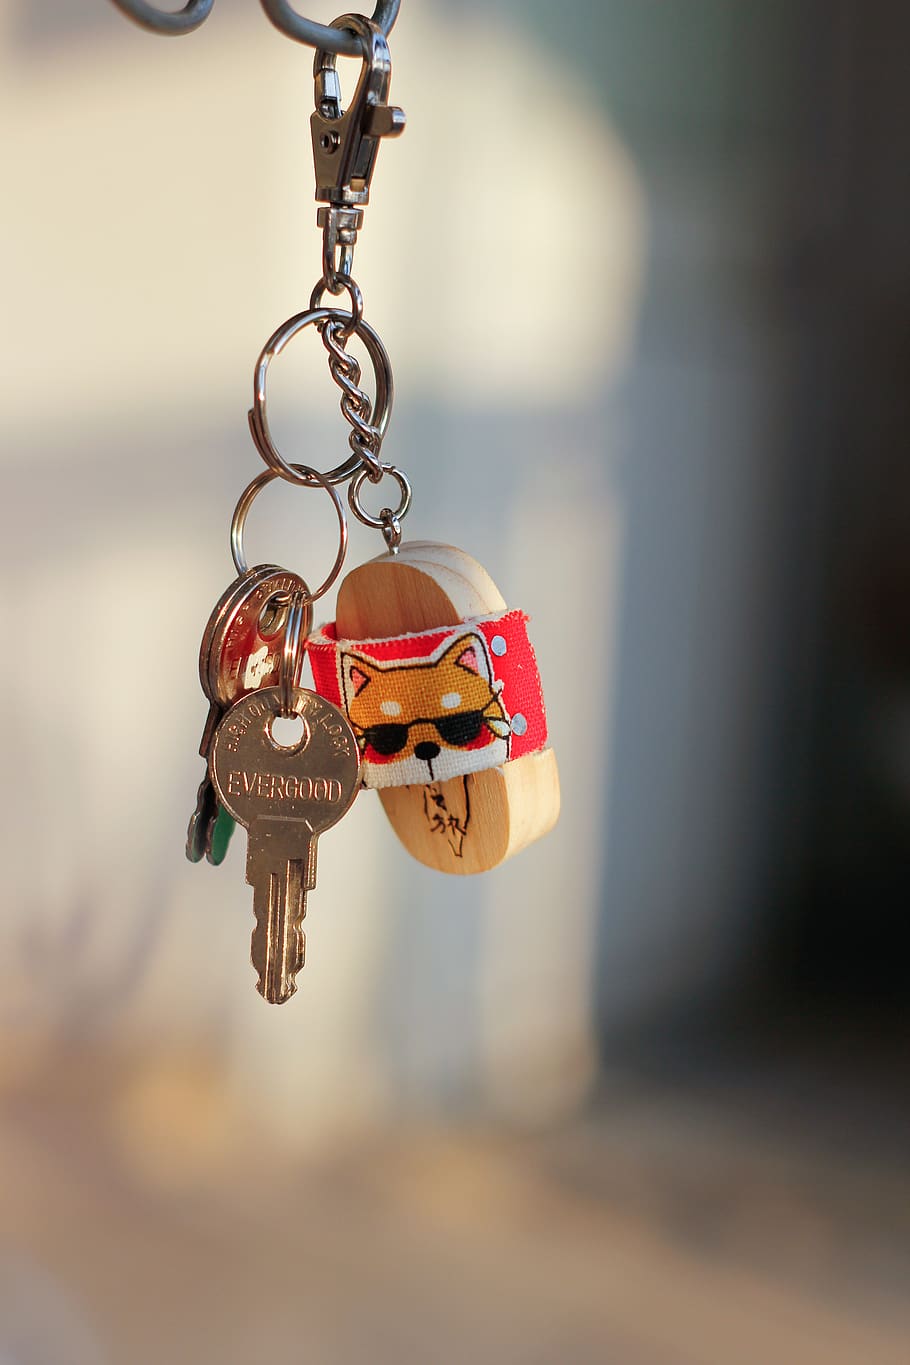 key, keychain, hanging, symbol, home, security, lock, love, focus on foreground, positive emotion